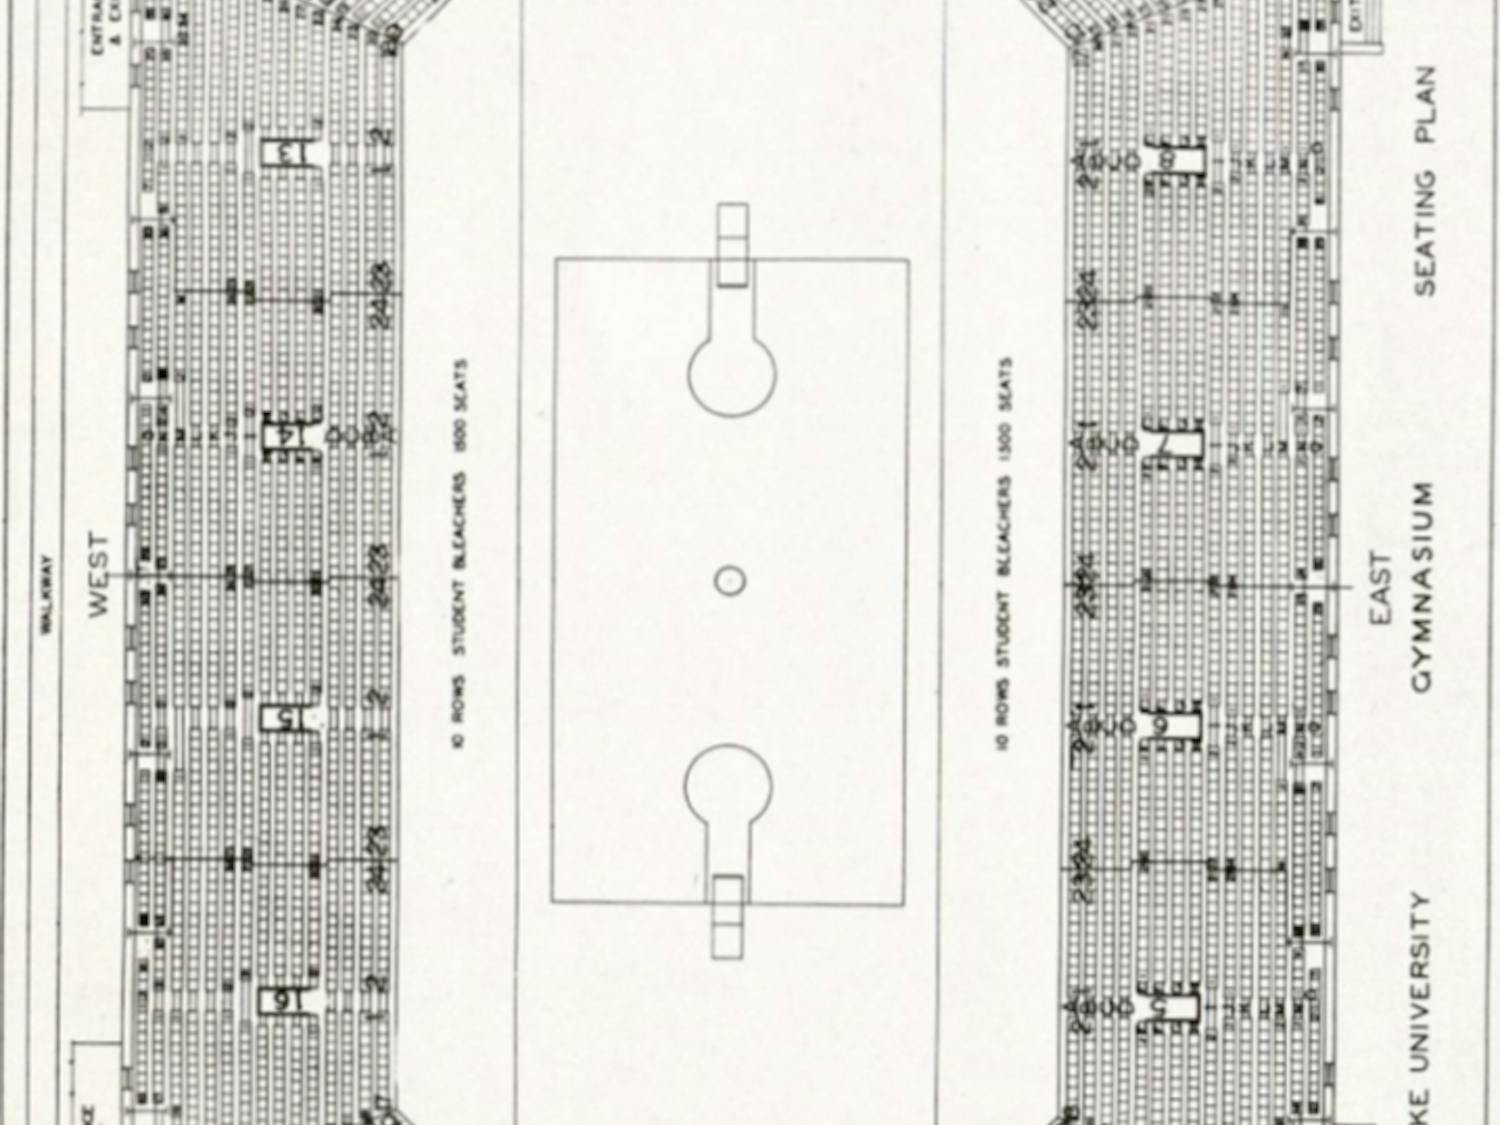 The original layout and seating chart for what would later become known as Cameron Indoor Stadium